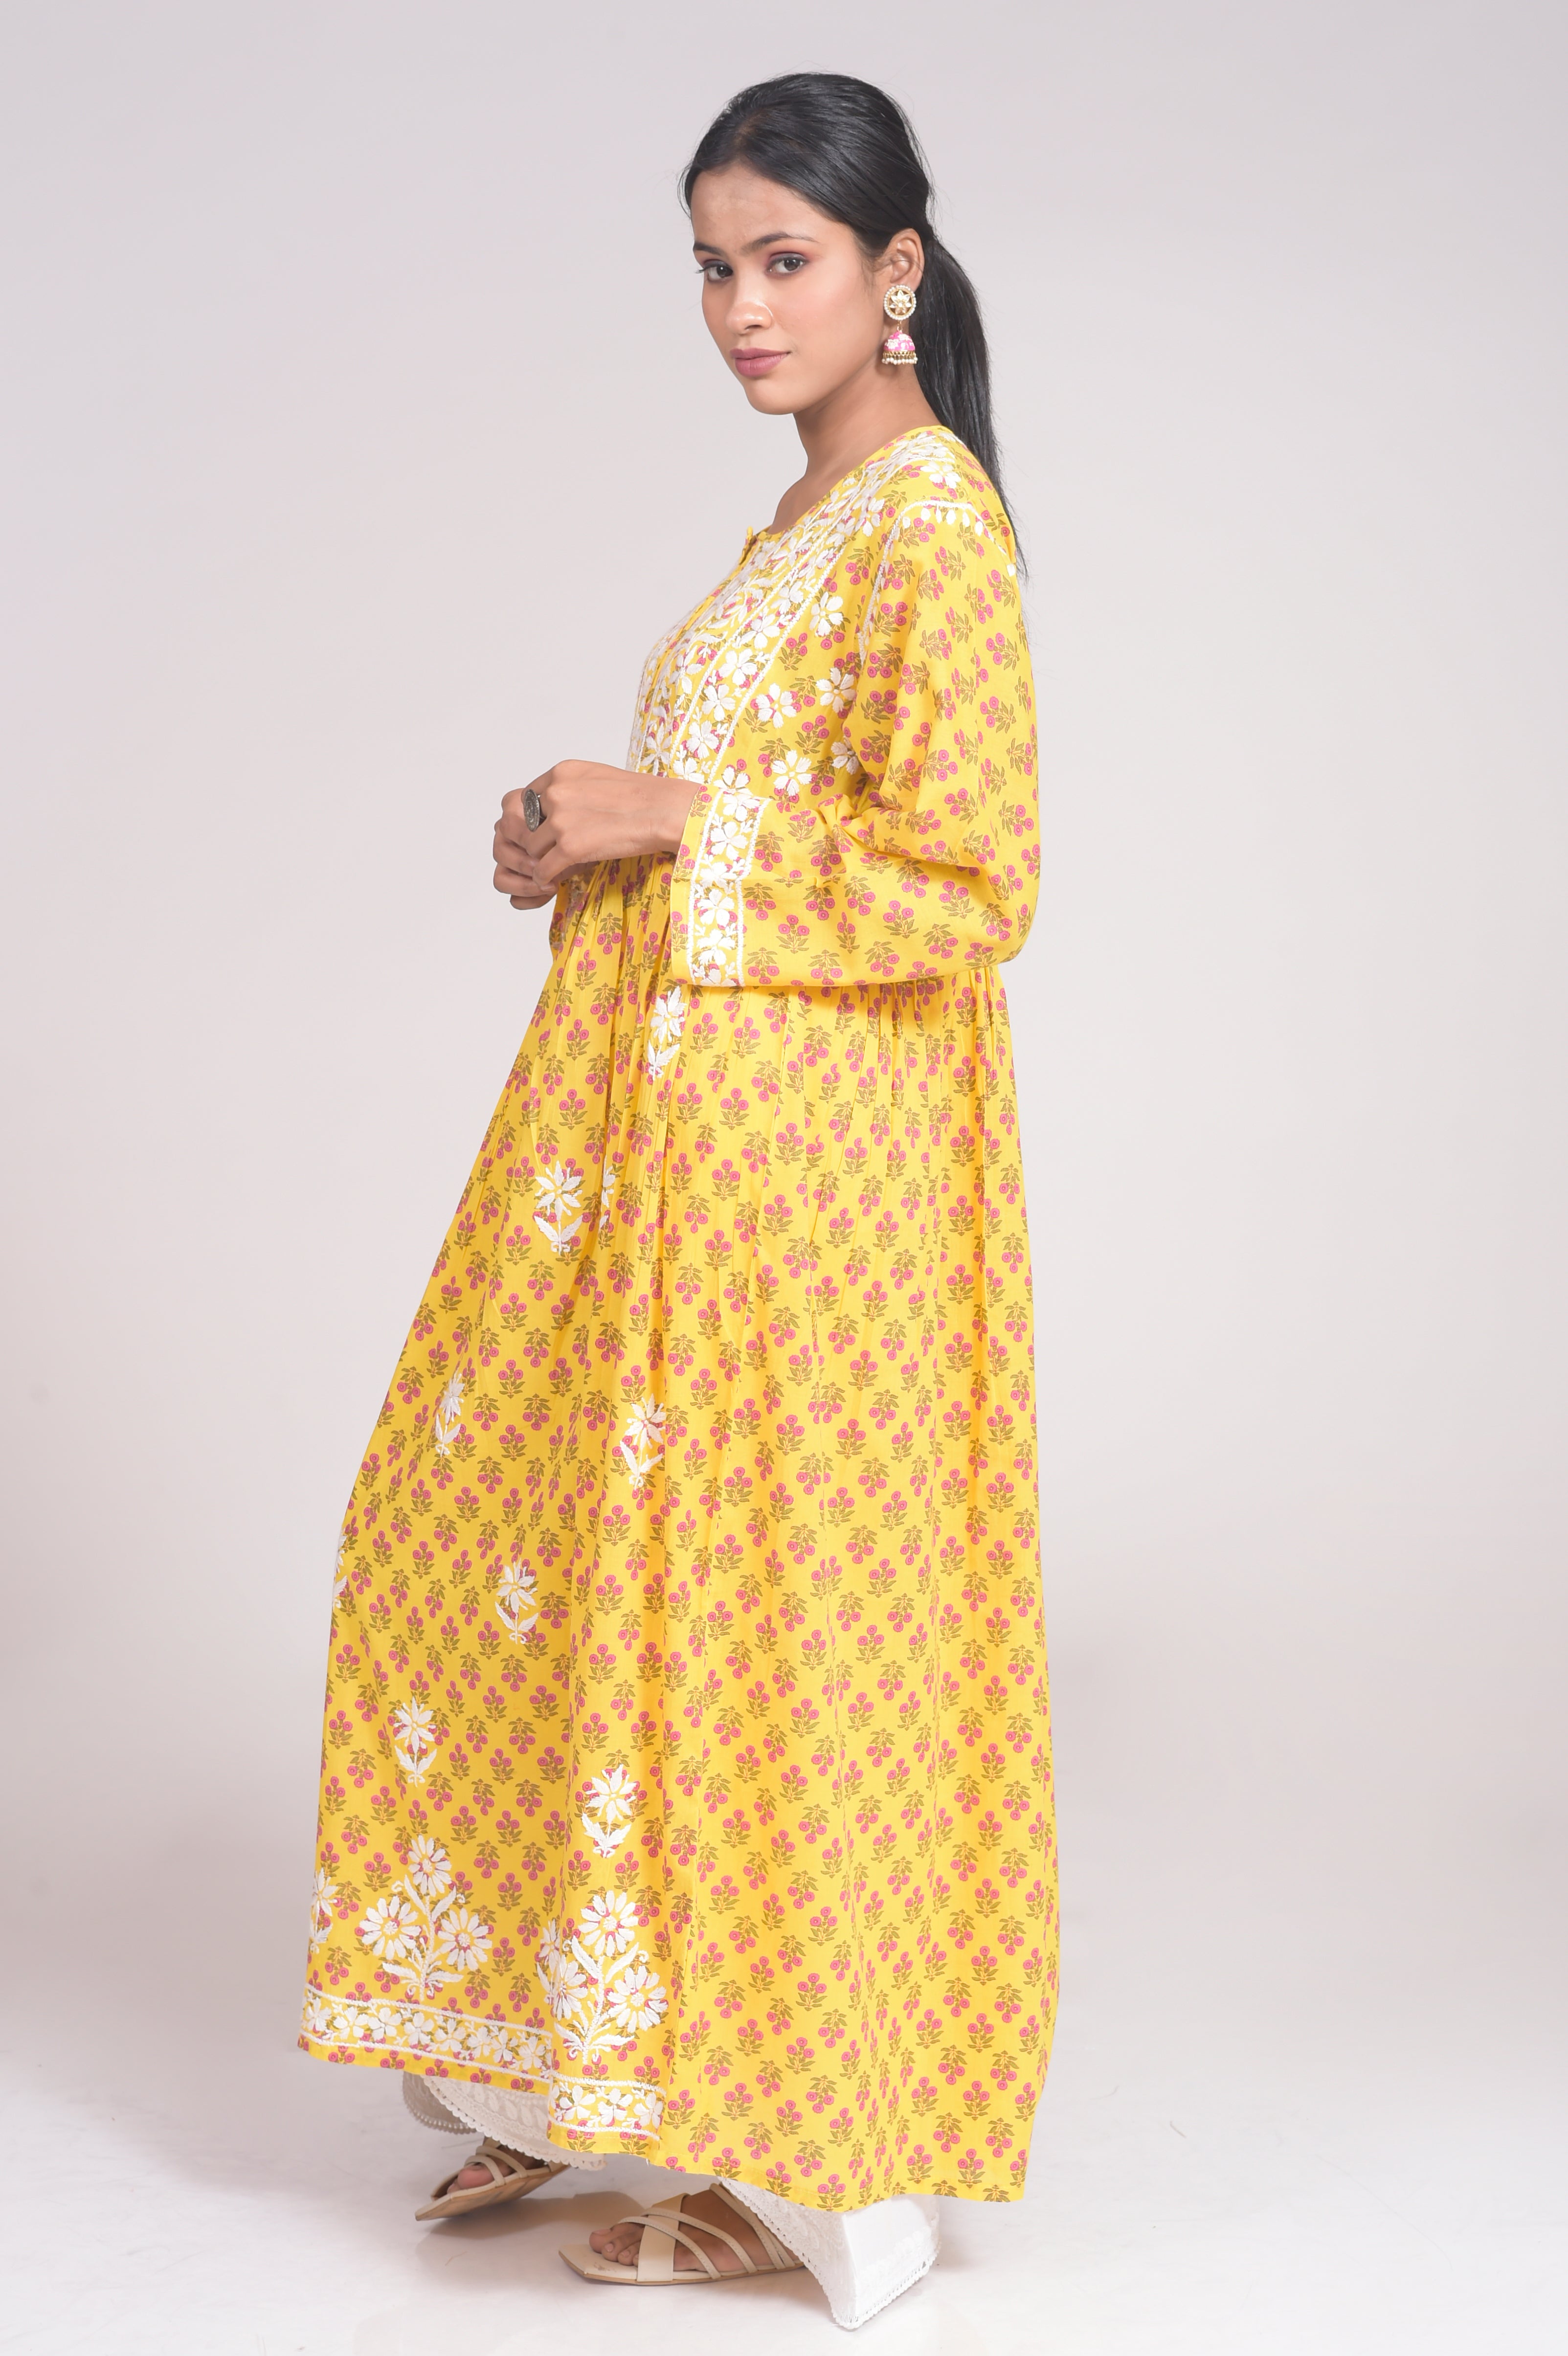 Soft Cotton Mustard Skin Freindly Elegant Gown Lucknow Chikan Emporium  With Hand Embroided